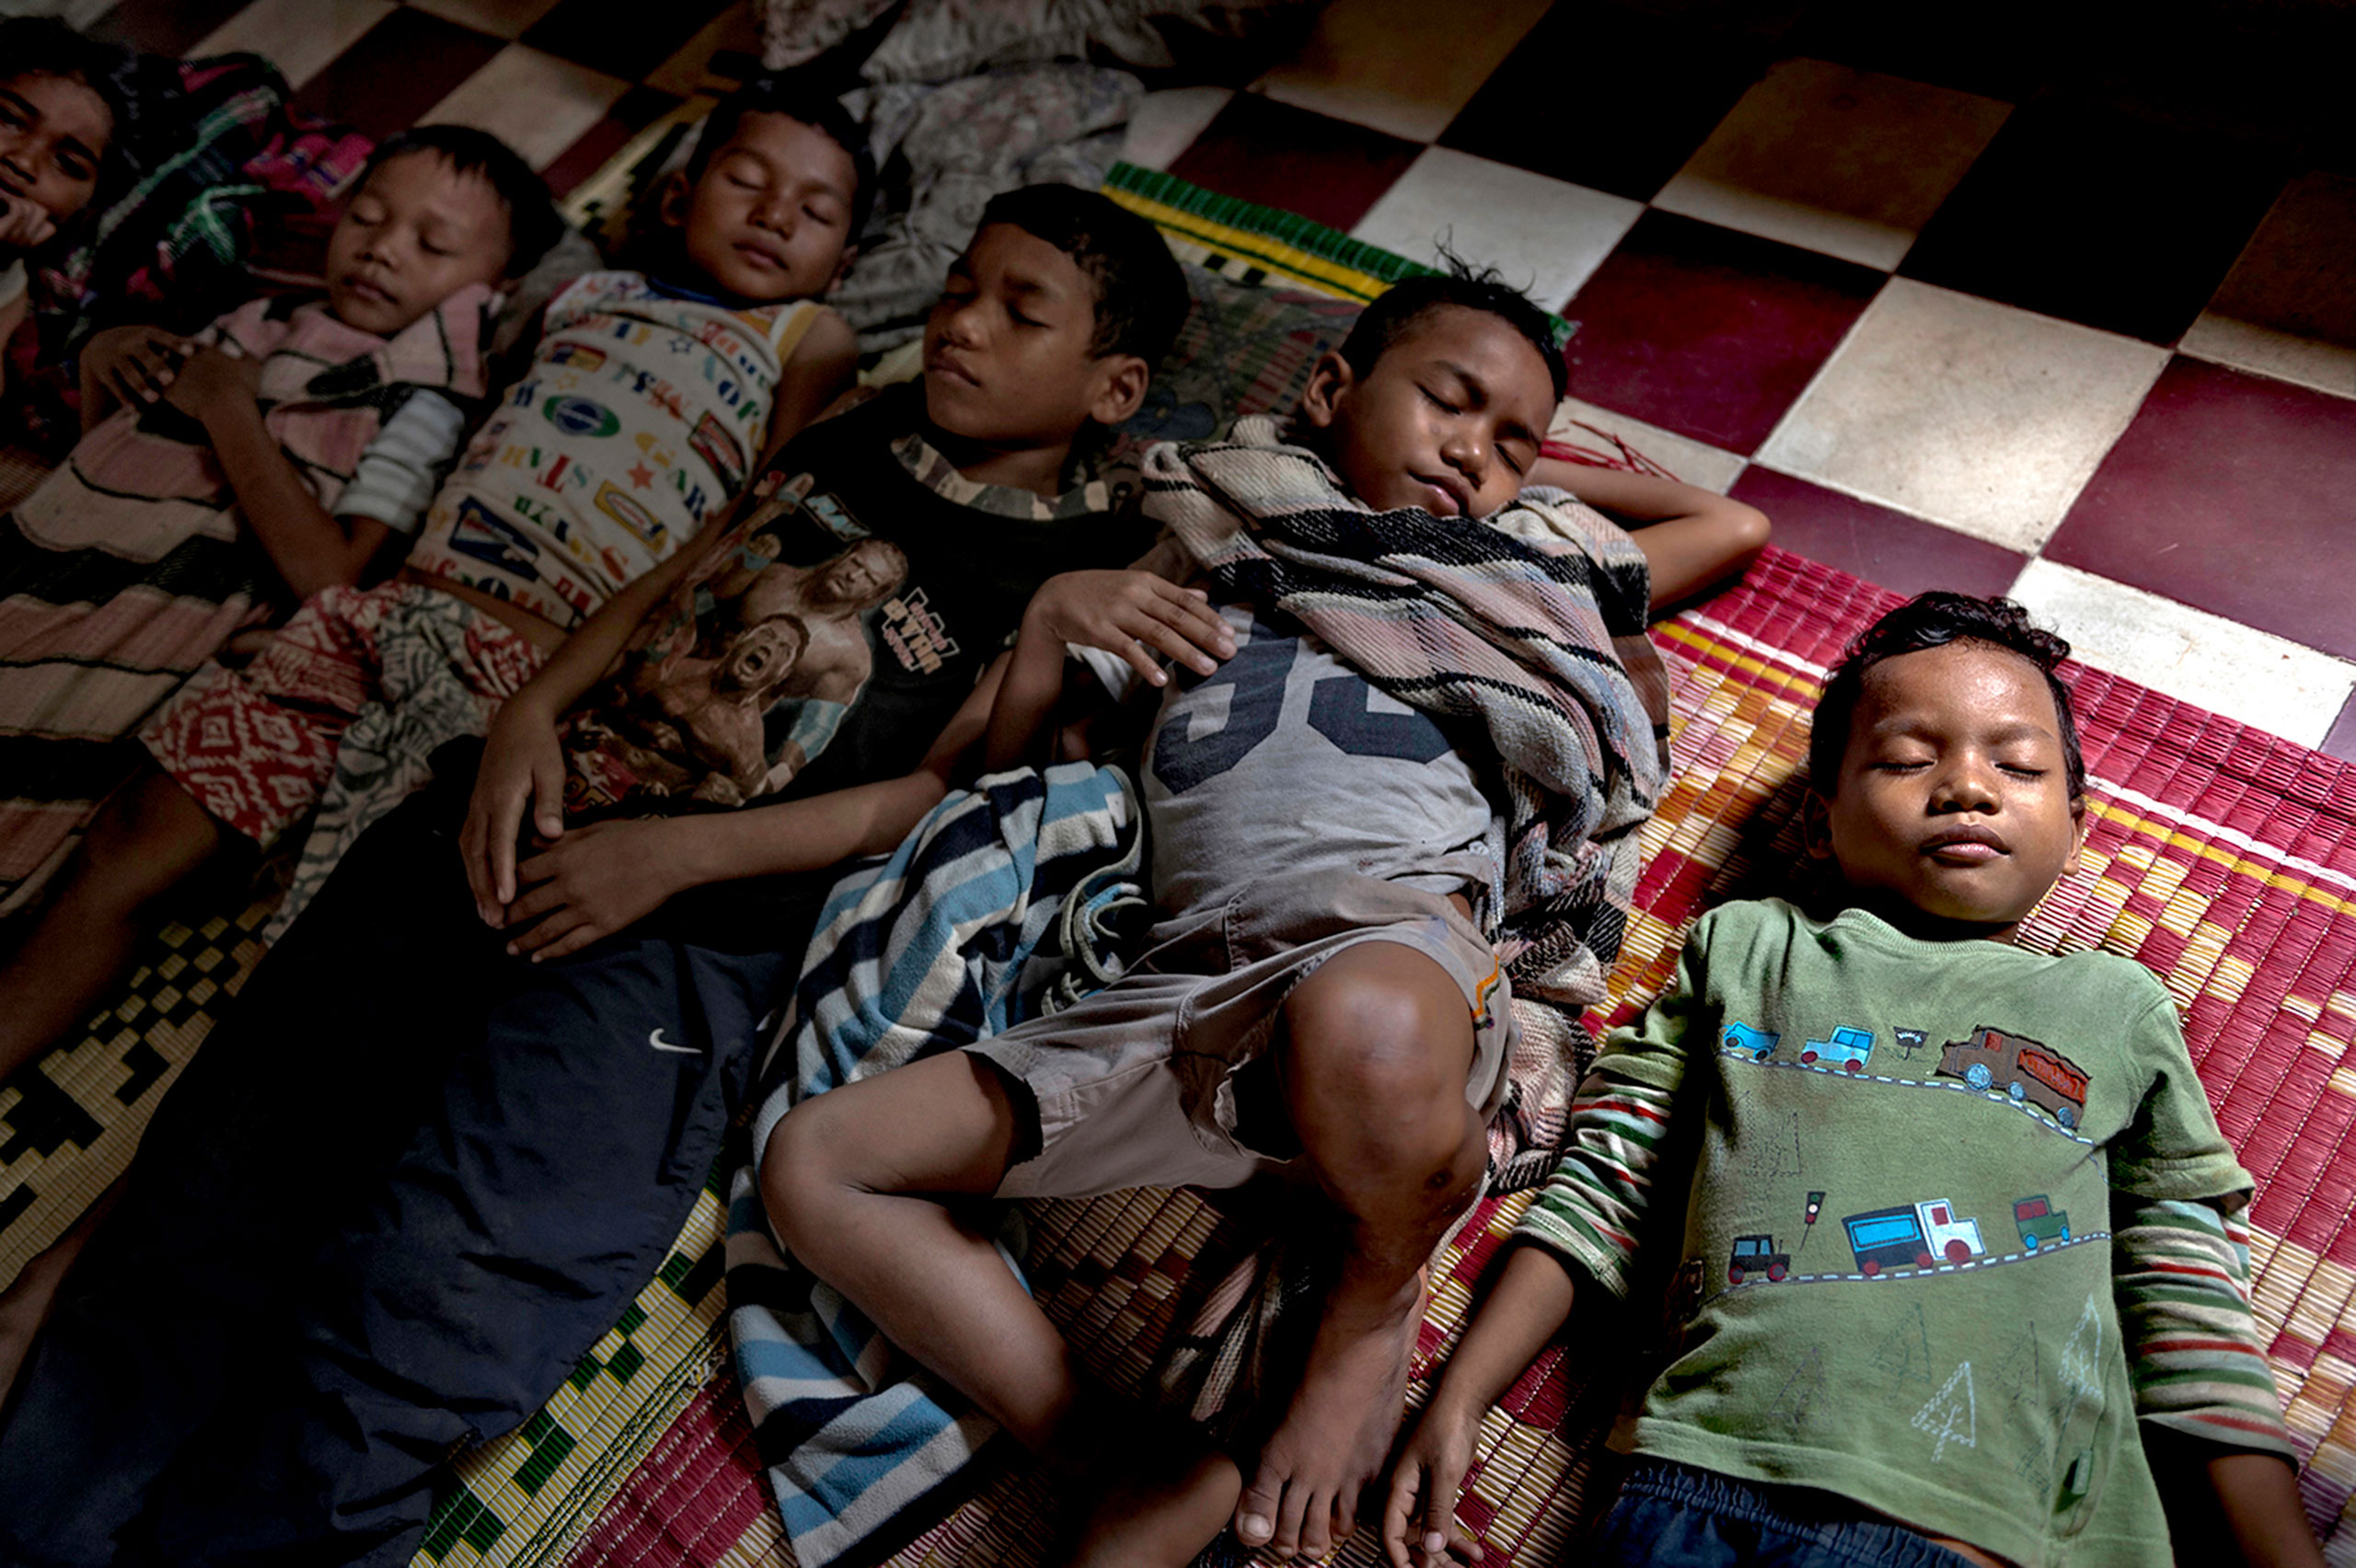 At the Krousa Thmey Center in Phnom Penh, Cambodia, five brothers sleep together on the floor. This is a temporary orphanage or, in reality, safe house for children who have been found abandoned and 
                              wandering the streets. Because space is limited, they cannot stay for long, but for now at least they are given some refuge from the influences of the streets of the city. These brothers range in age from 5 to 12.